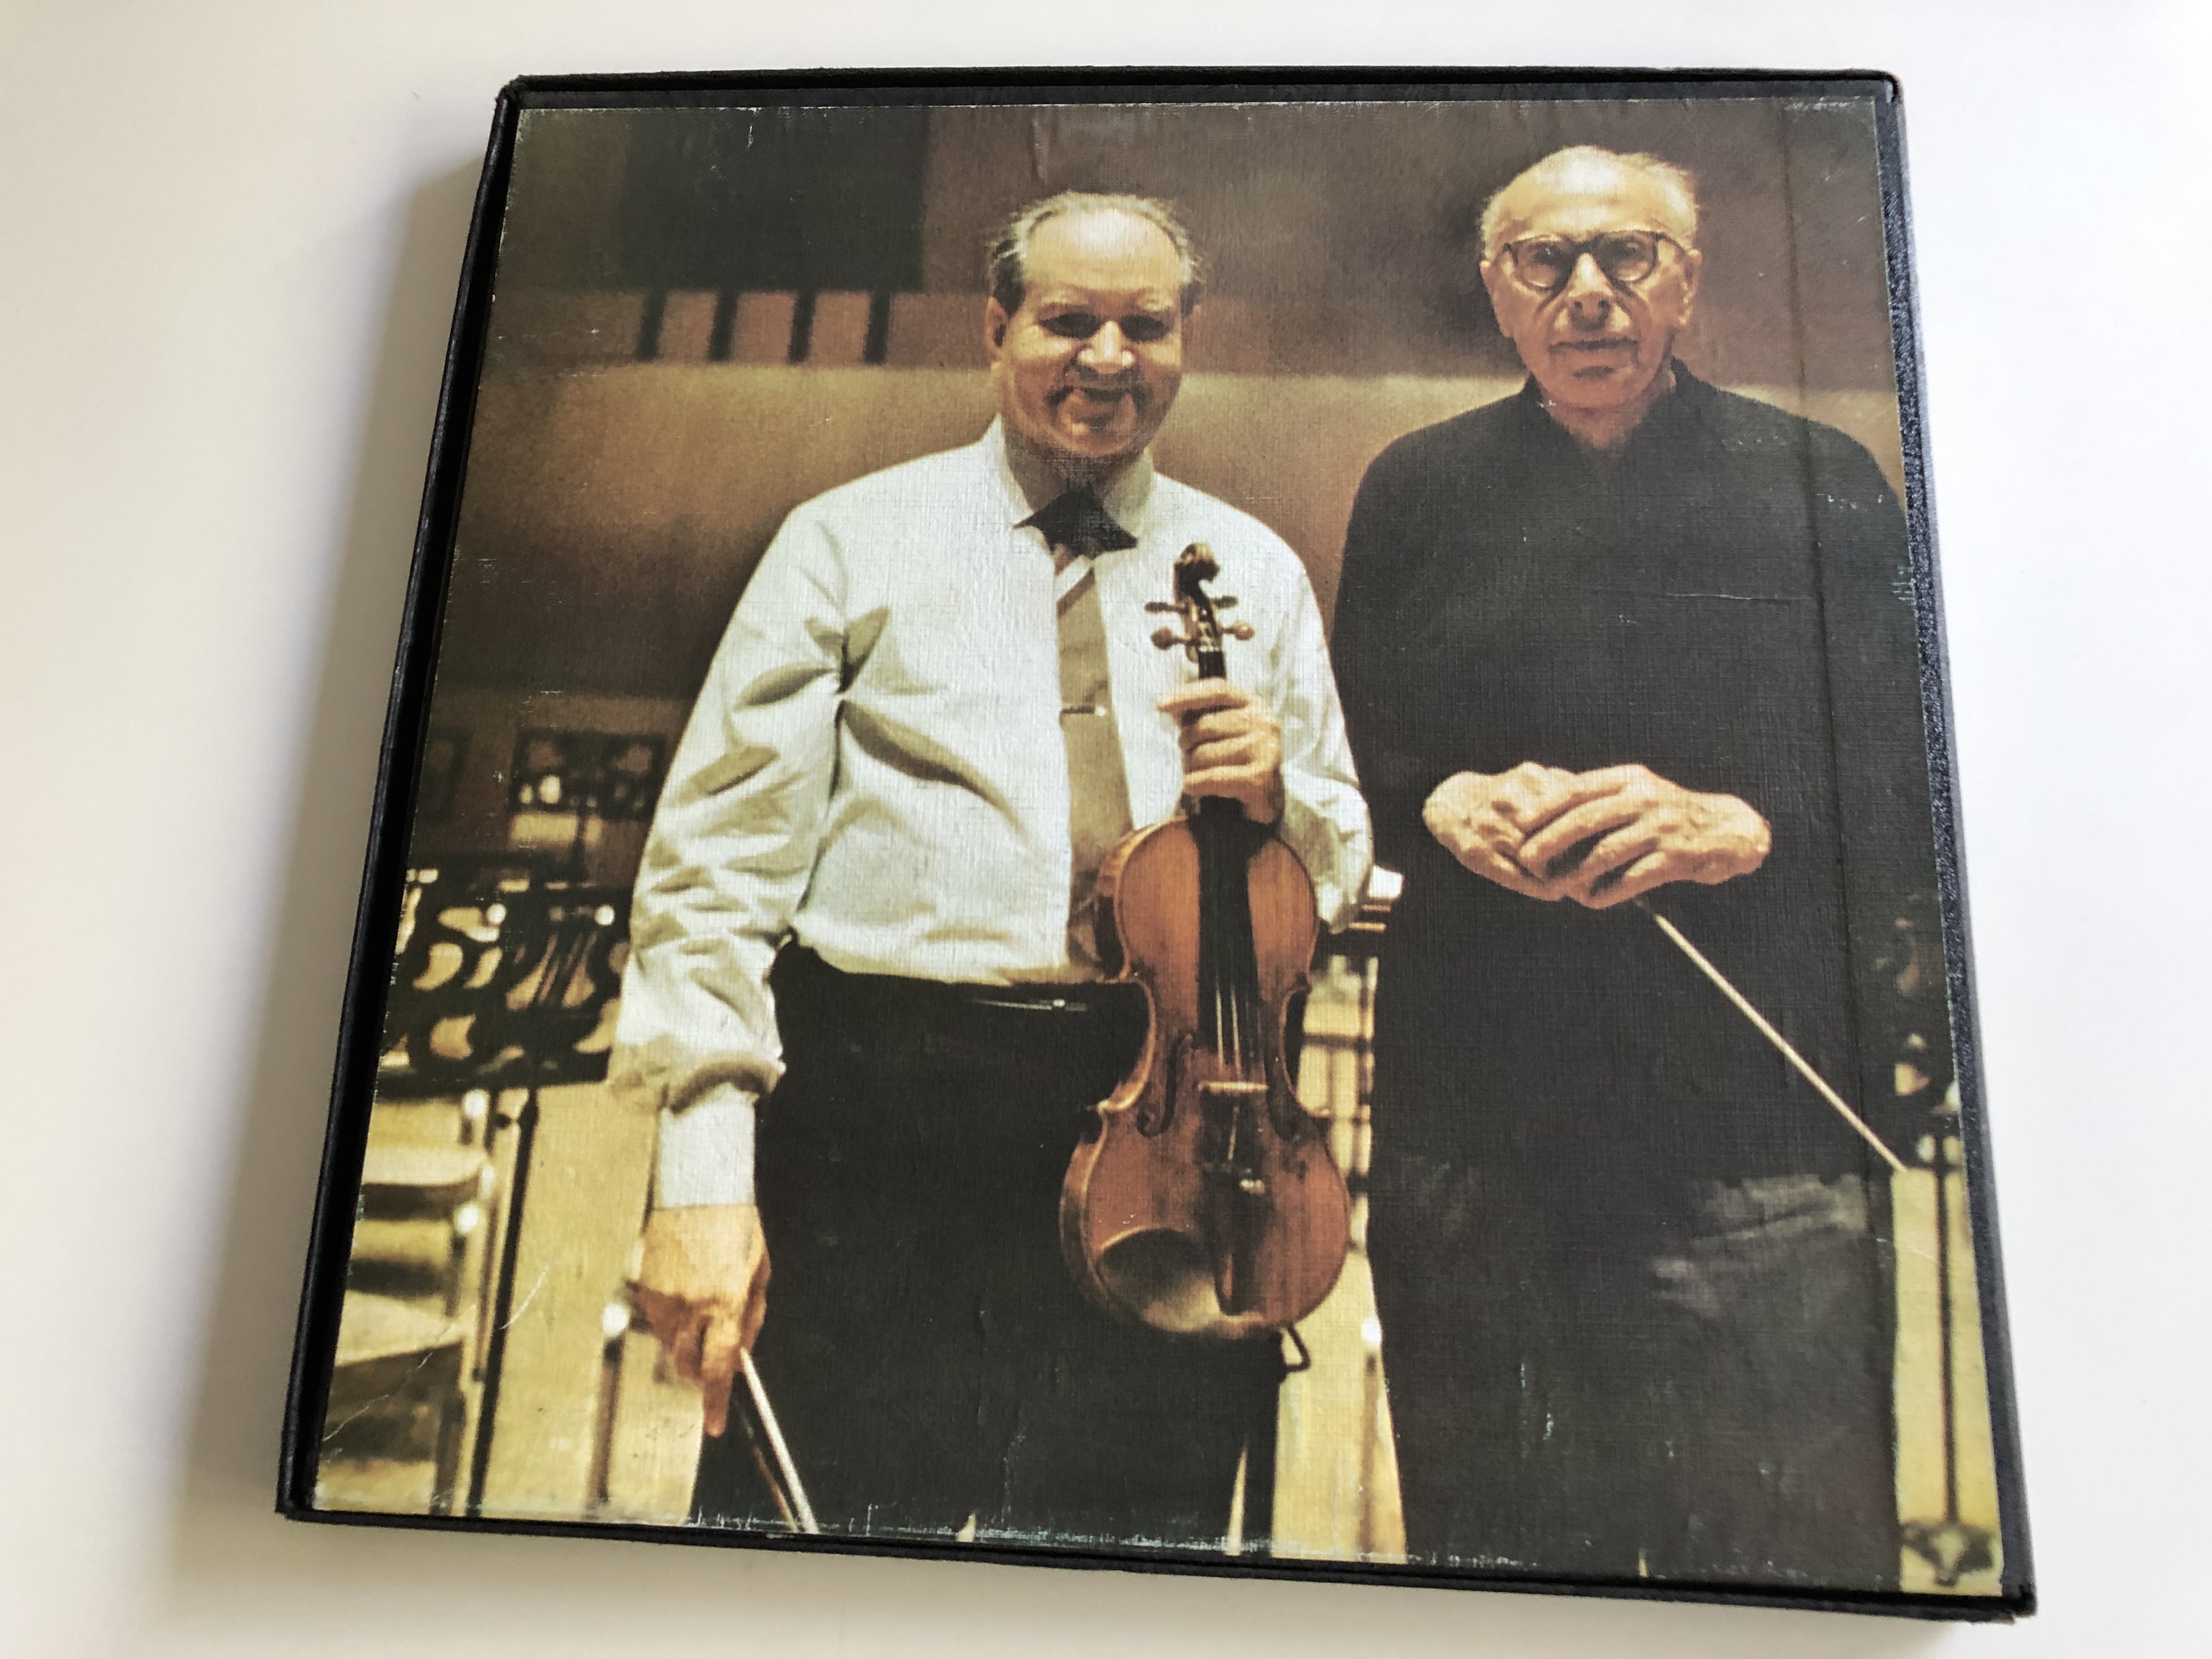 brahms-violin-concerto-double-concerto-oistrakh-rostropovich-szell-the-cleveland-orchestra-his-master-s-voice-2x-lp-stereo-sls-7862-7-.jpg